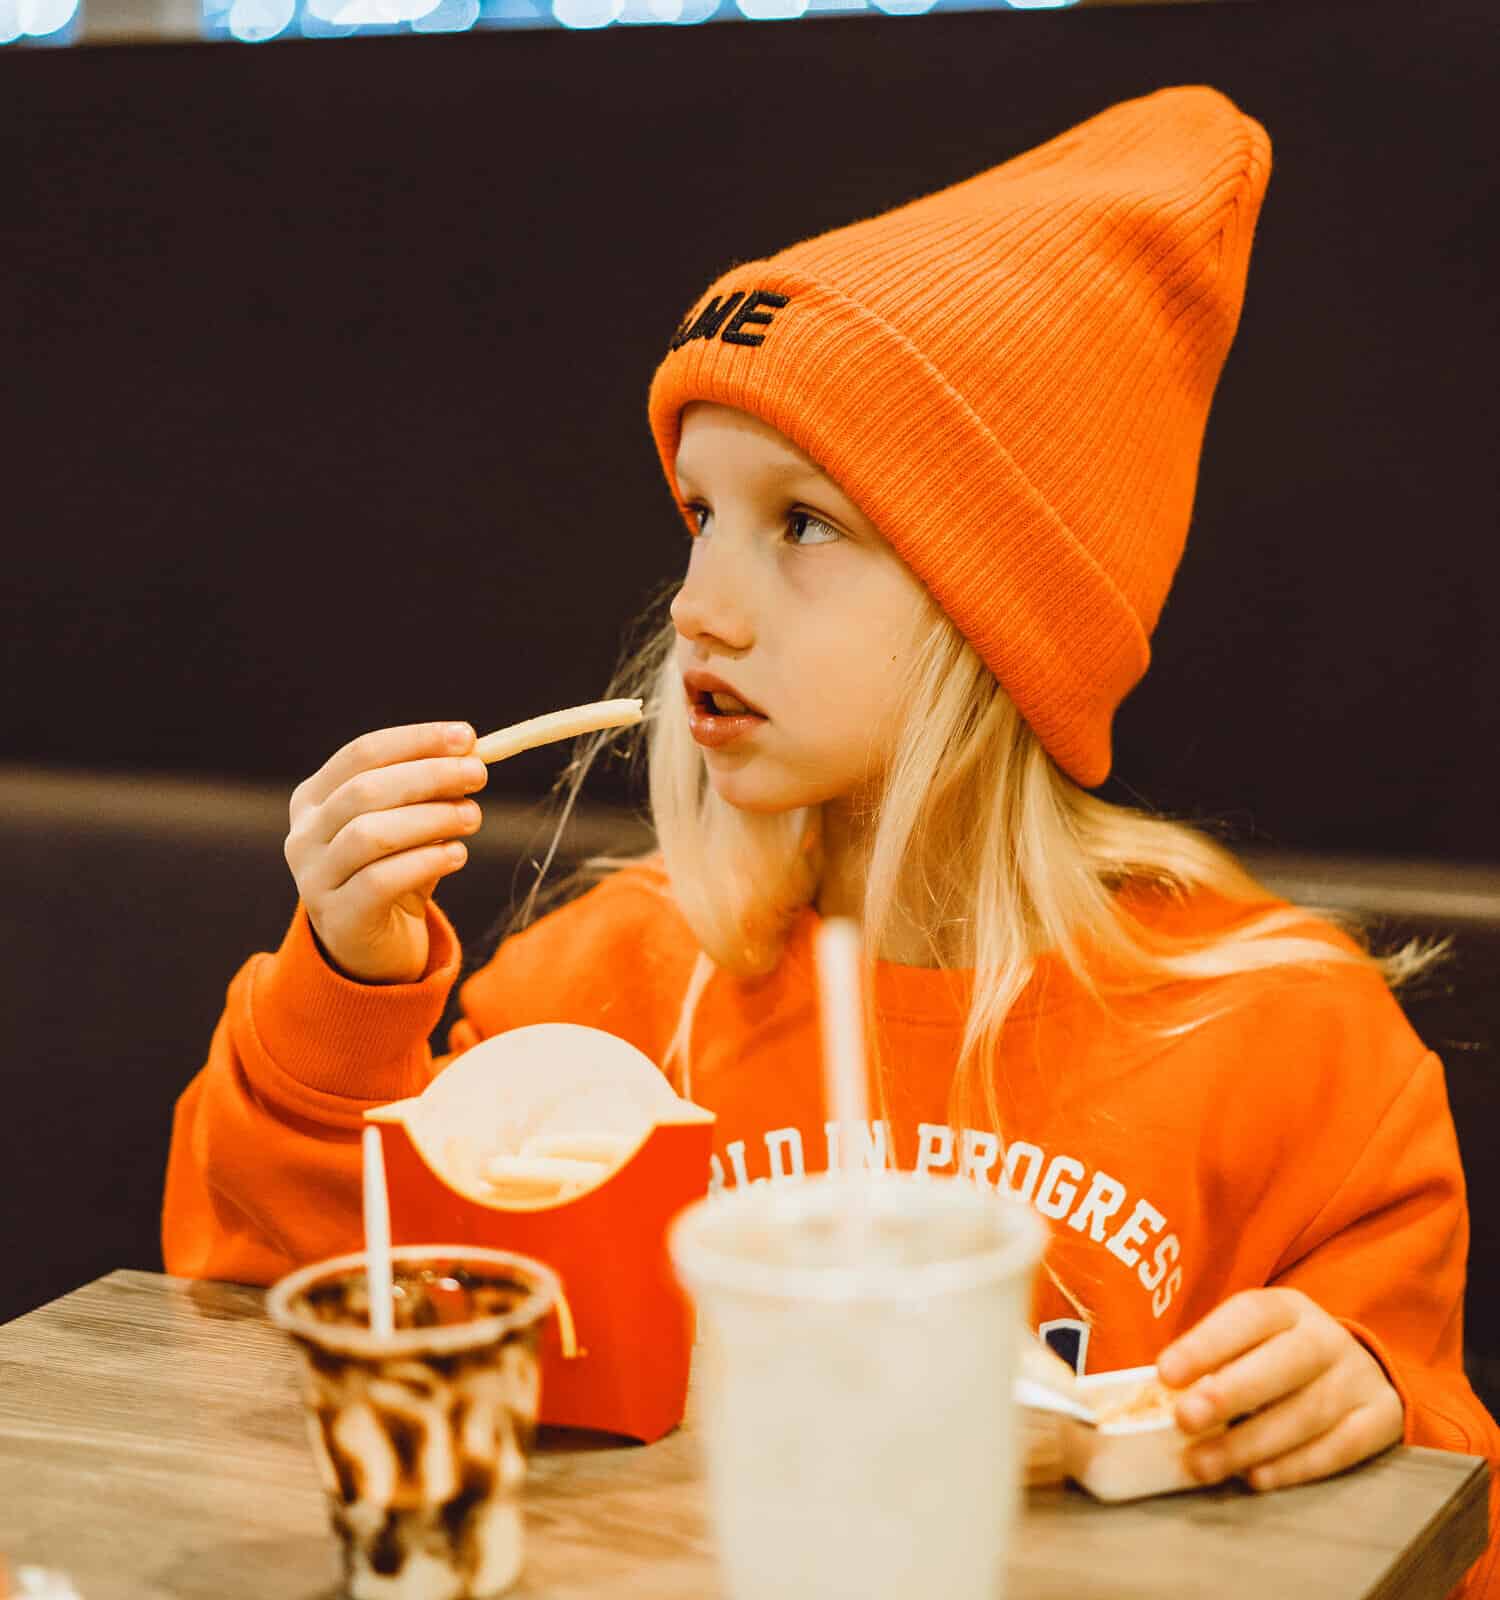 children at mcdonald's. Little girl eats french fries and drinks a cocktail in a cafe.